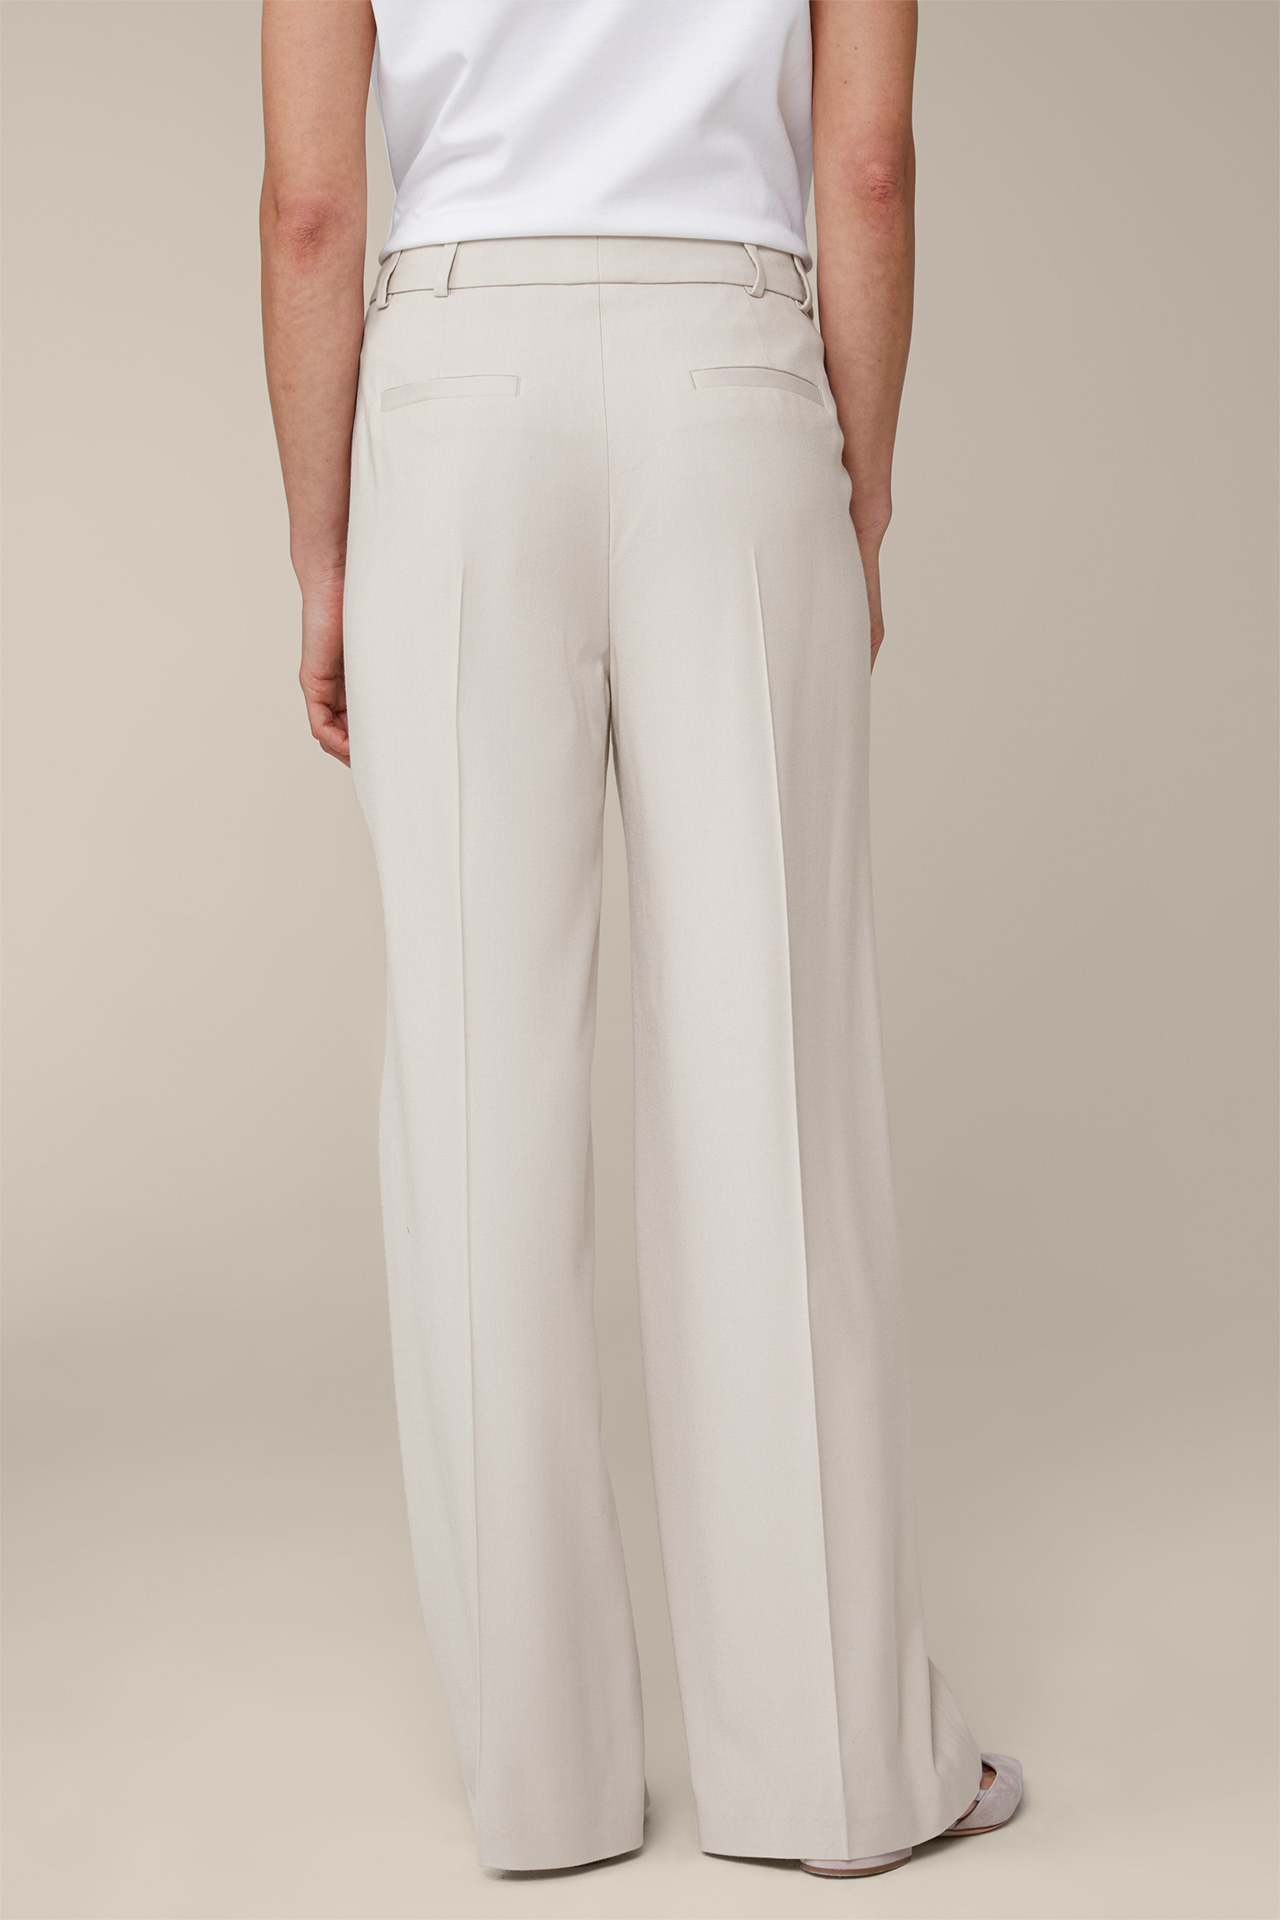 Marlene Trousers with Viscose and Wool in Light Beige